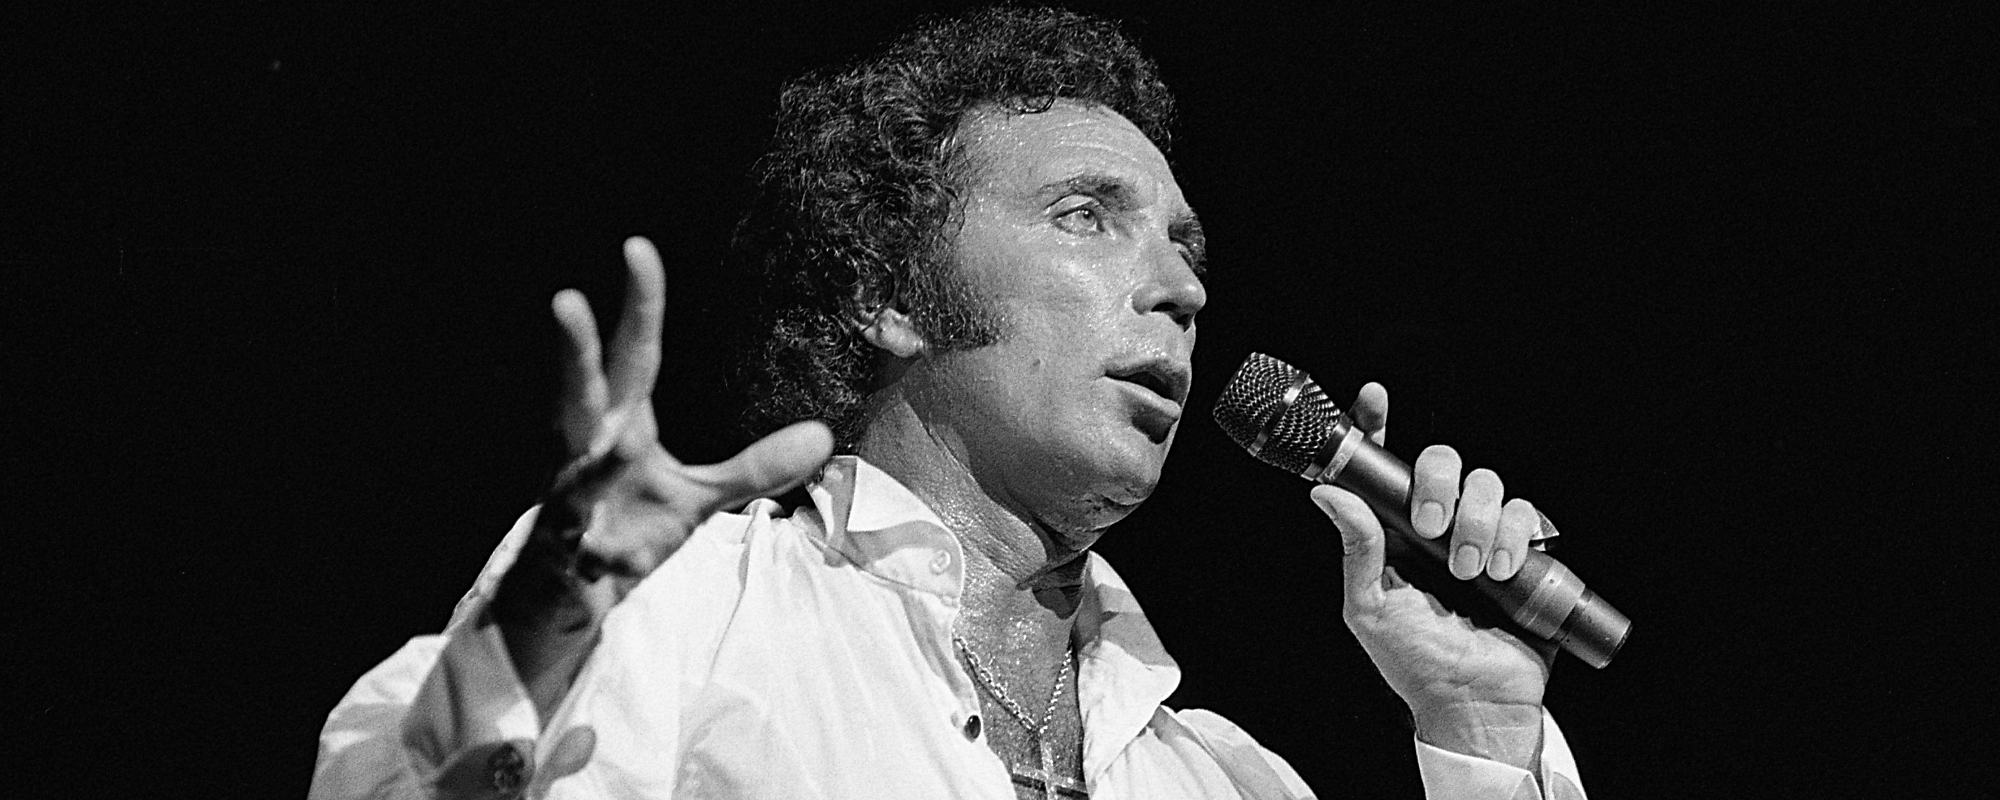 Tom Jones: ‘What’s New Pussycat?’ Was a ‘Backhanded Compliment’